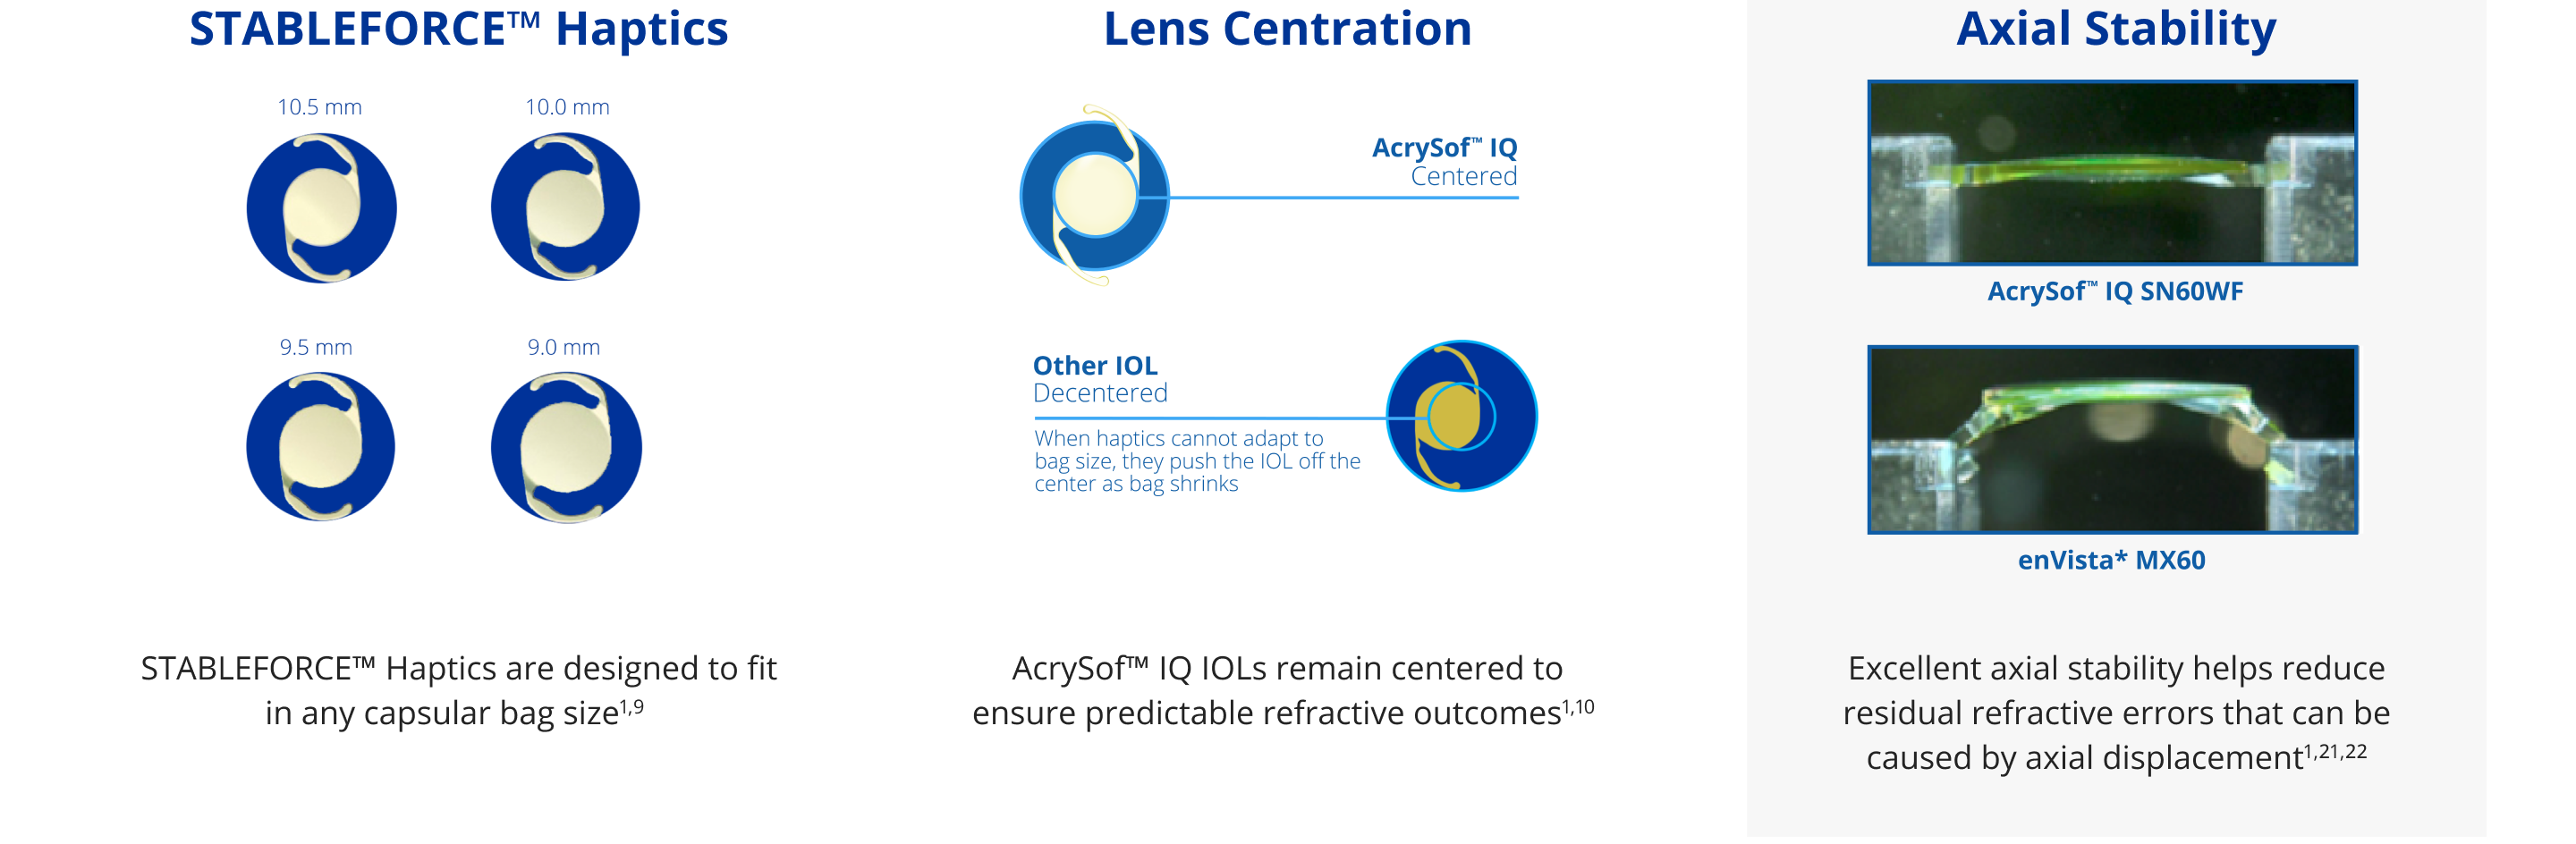 Illustration showing how STABLEFORCE Haptics allow AcrySof IQ IOLs to fit in any capsular bag size: 10.5 mm, 10.0 mm, 9.5 mm, 9.0 mm. Two illustrations. The first is an illustration of an AcrySof IQ IOL. A light blue circle is placed on the centre of the IOL to draw focus. A light blue line is connected to the IOL with text that reads “AcrySof IQ Centered.” The second is an illustration of other generic IOLs. A light blue line is connected to the IOL with text that reads “Other IOL Decentered.” Smaller text underneath reads “When haptics cannot adapt to bag size, they push the IOL off the center as bag shrinks.” 2 images illustrating how AcrySof IQ IOL has greater axial stability than enVisto MX60, which helps to reduce refractive errors.